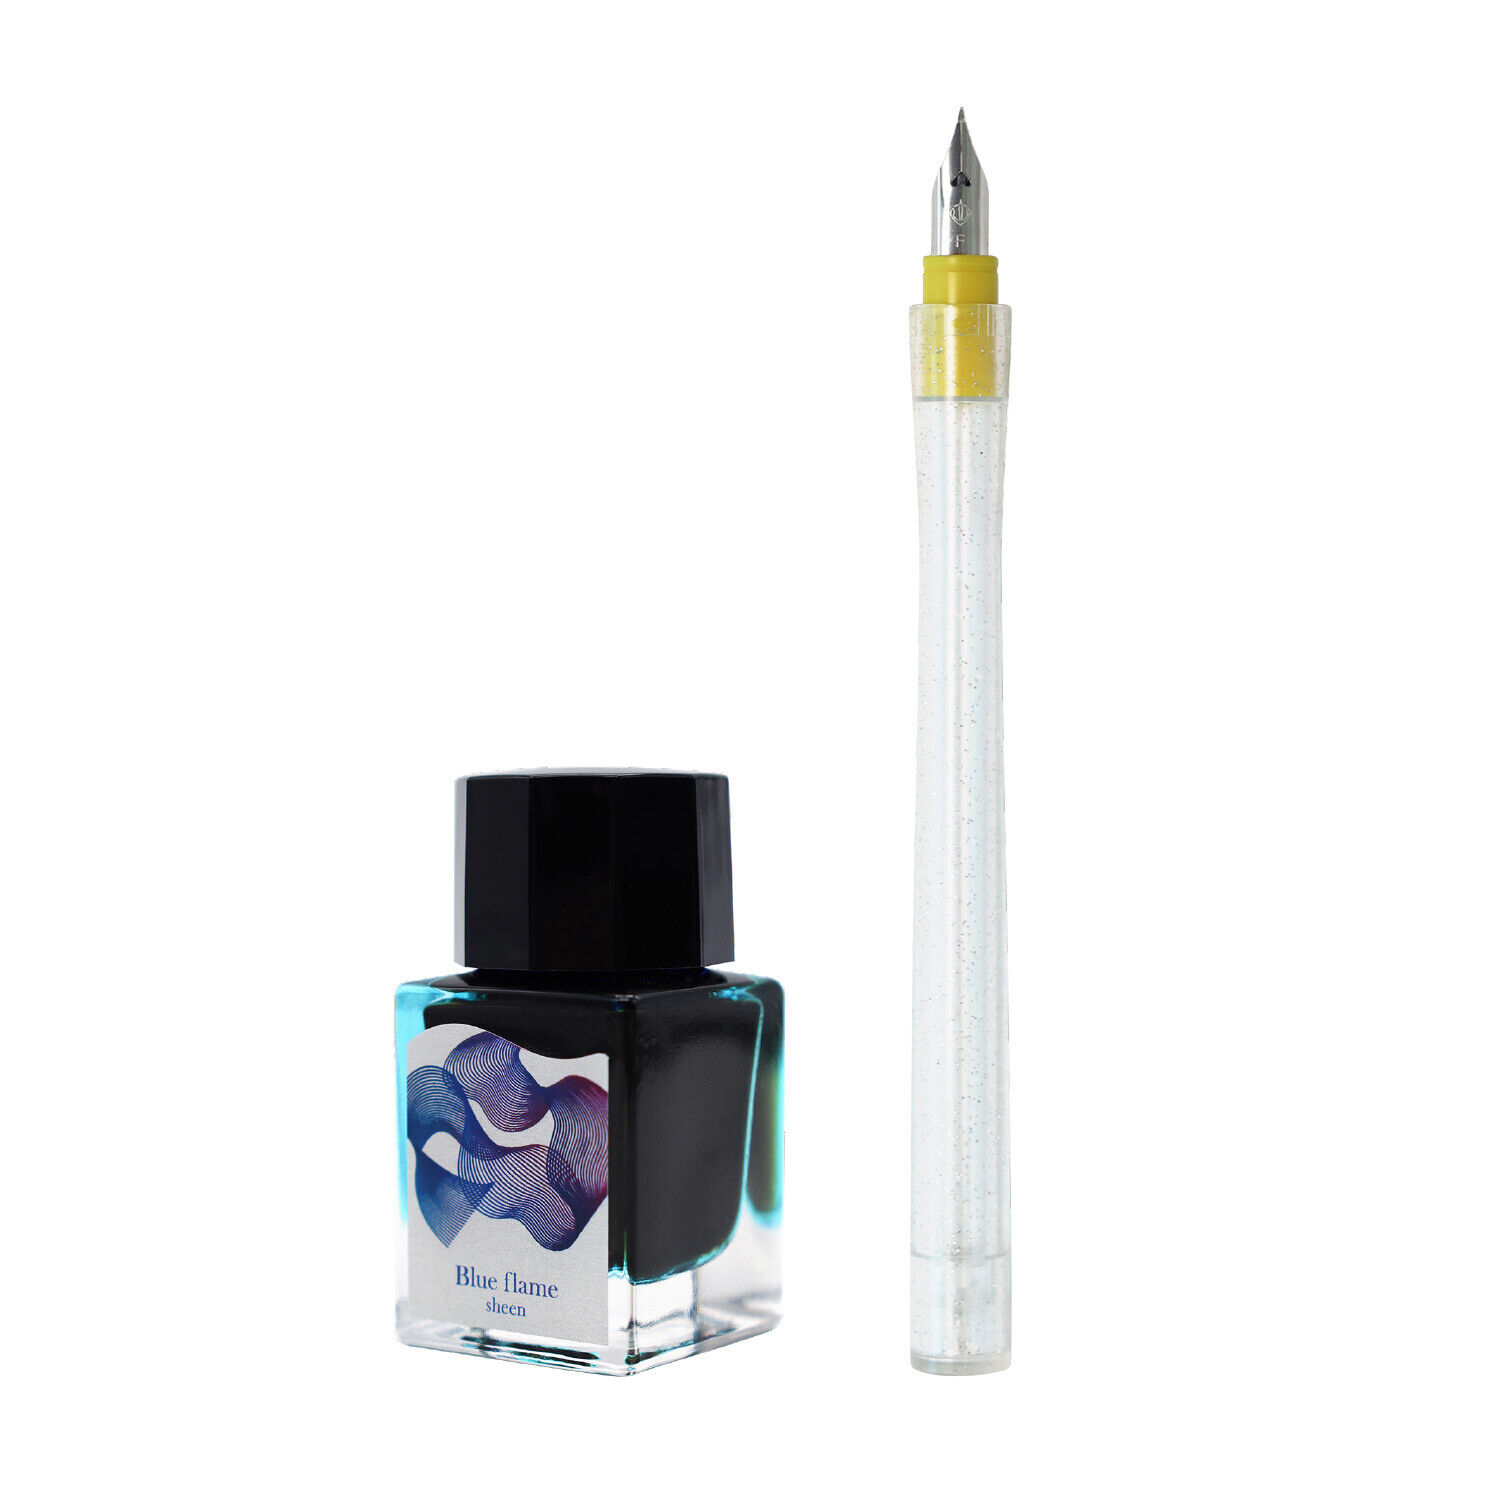 Sailor Compass Dipton Sheen Bottled Ink in Blue Flame with Dip Pen Set - 10mL